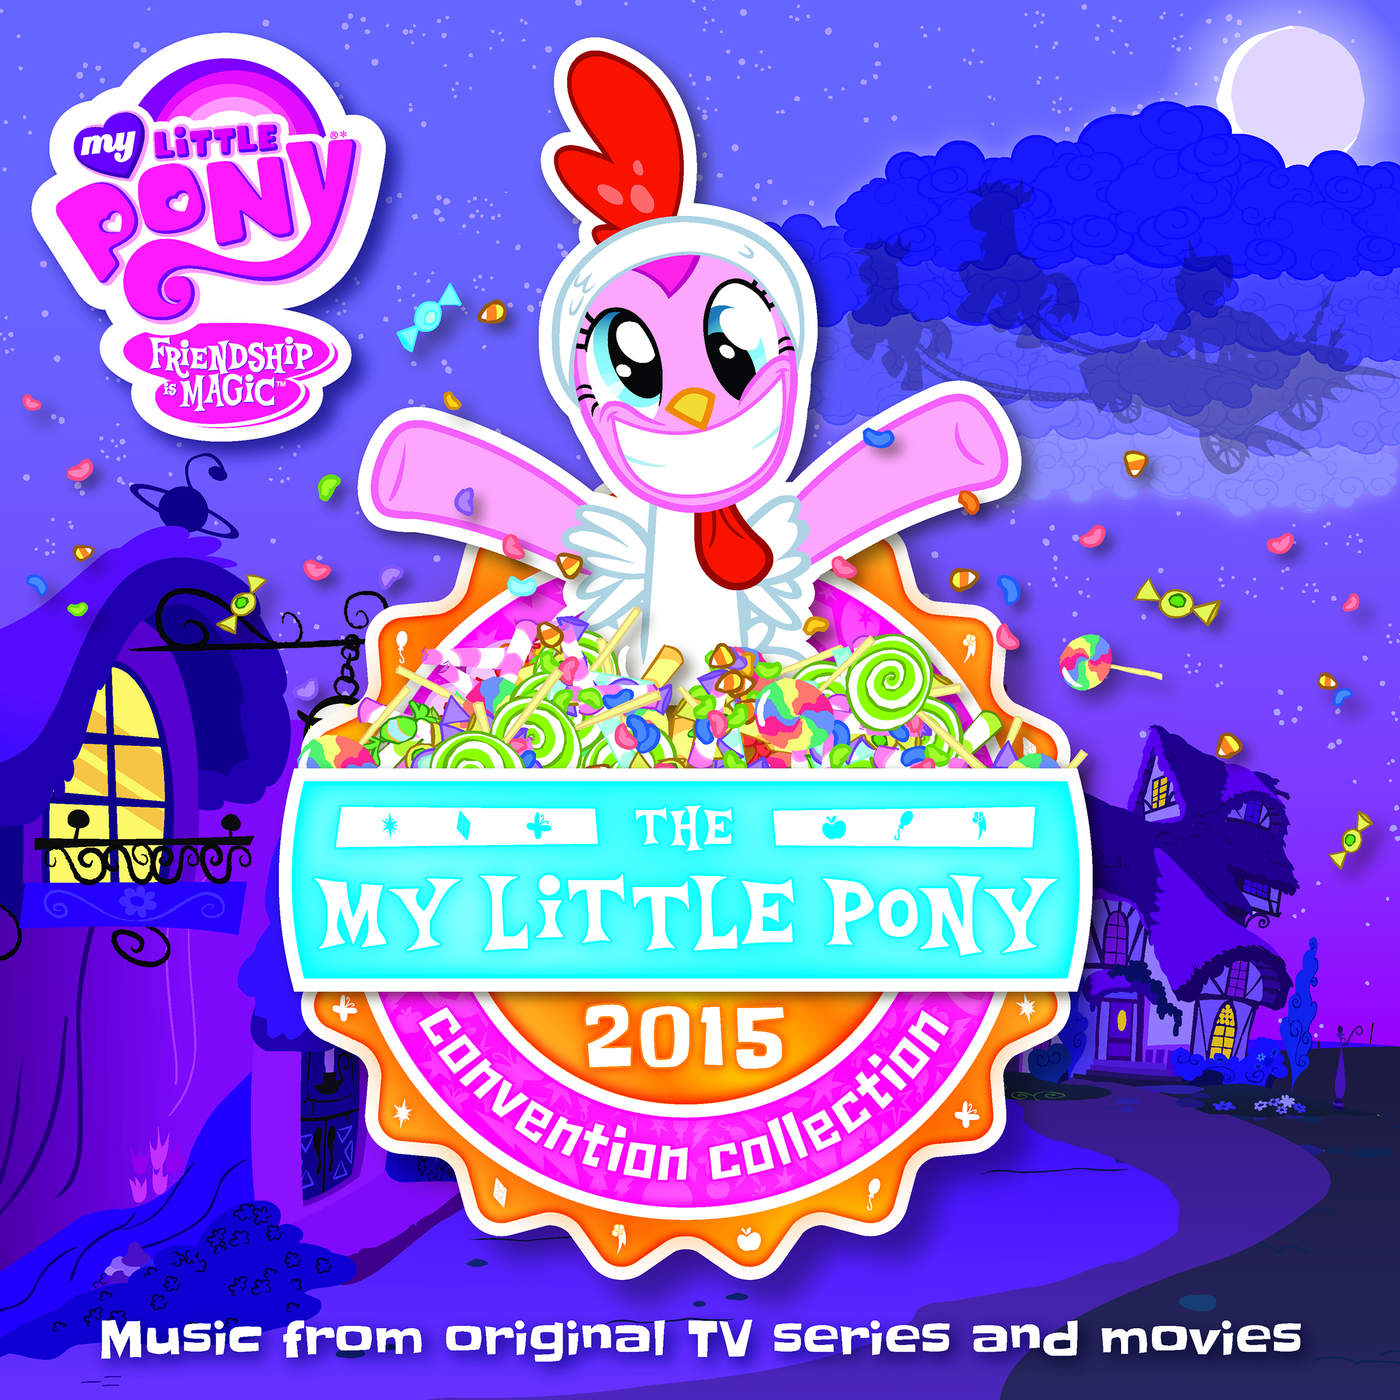 [Obrázek: My_Little_Pony_2015_Convention_Collectio..._cover.png]